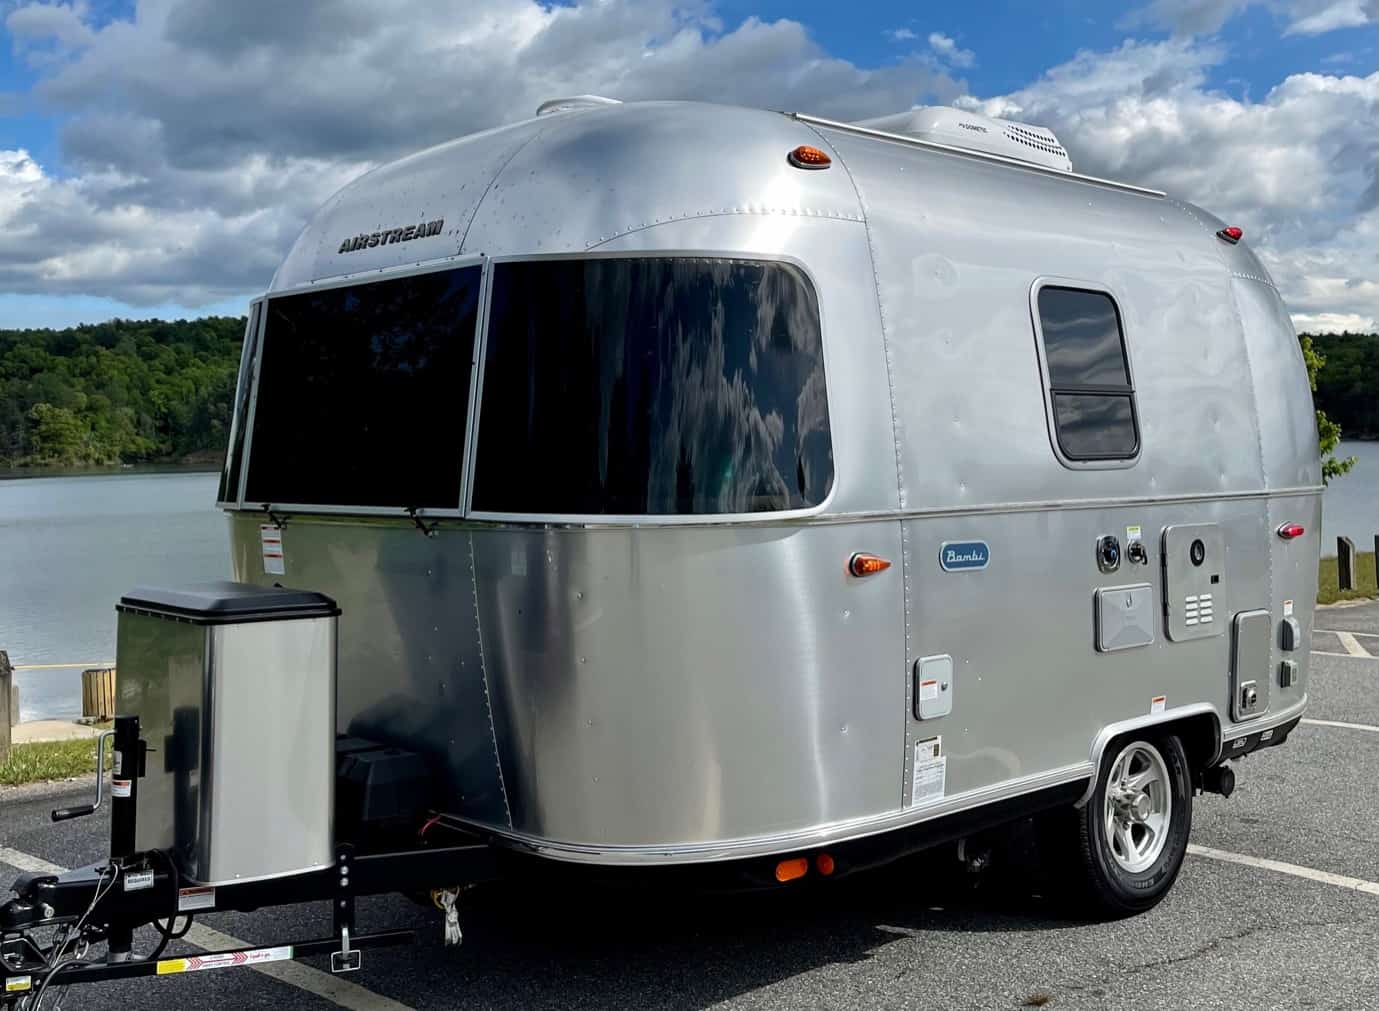 2021 Airstream 16FT Bambi For Sale in Sarasota - Airstream Marketplace How Much Is A New Airstream Bambi